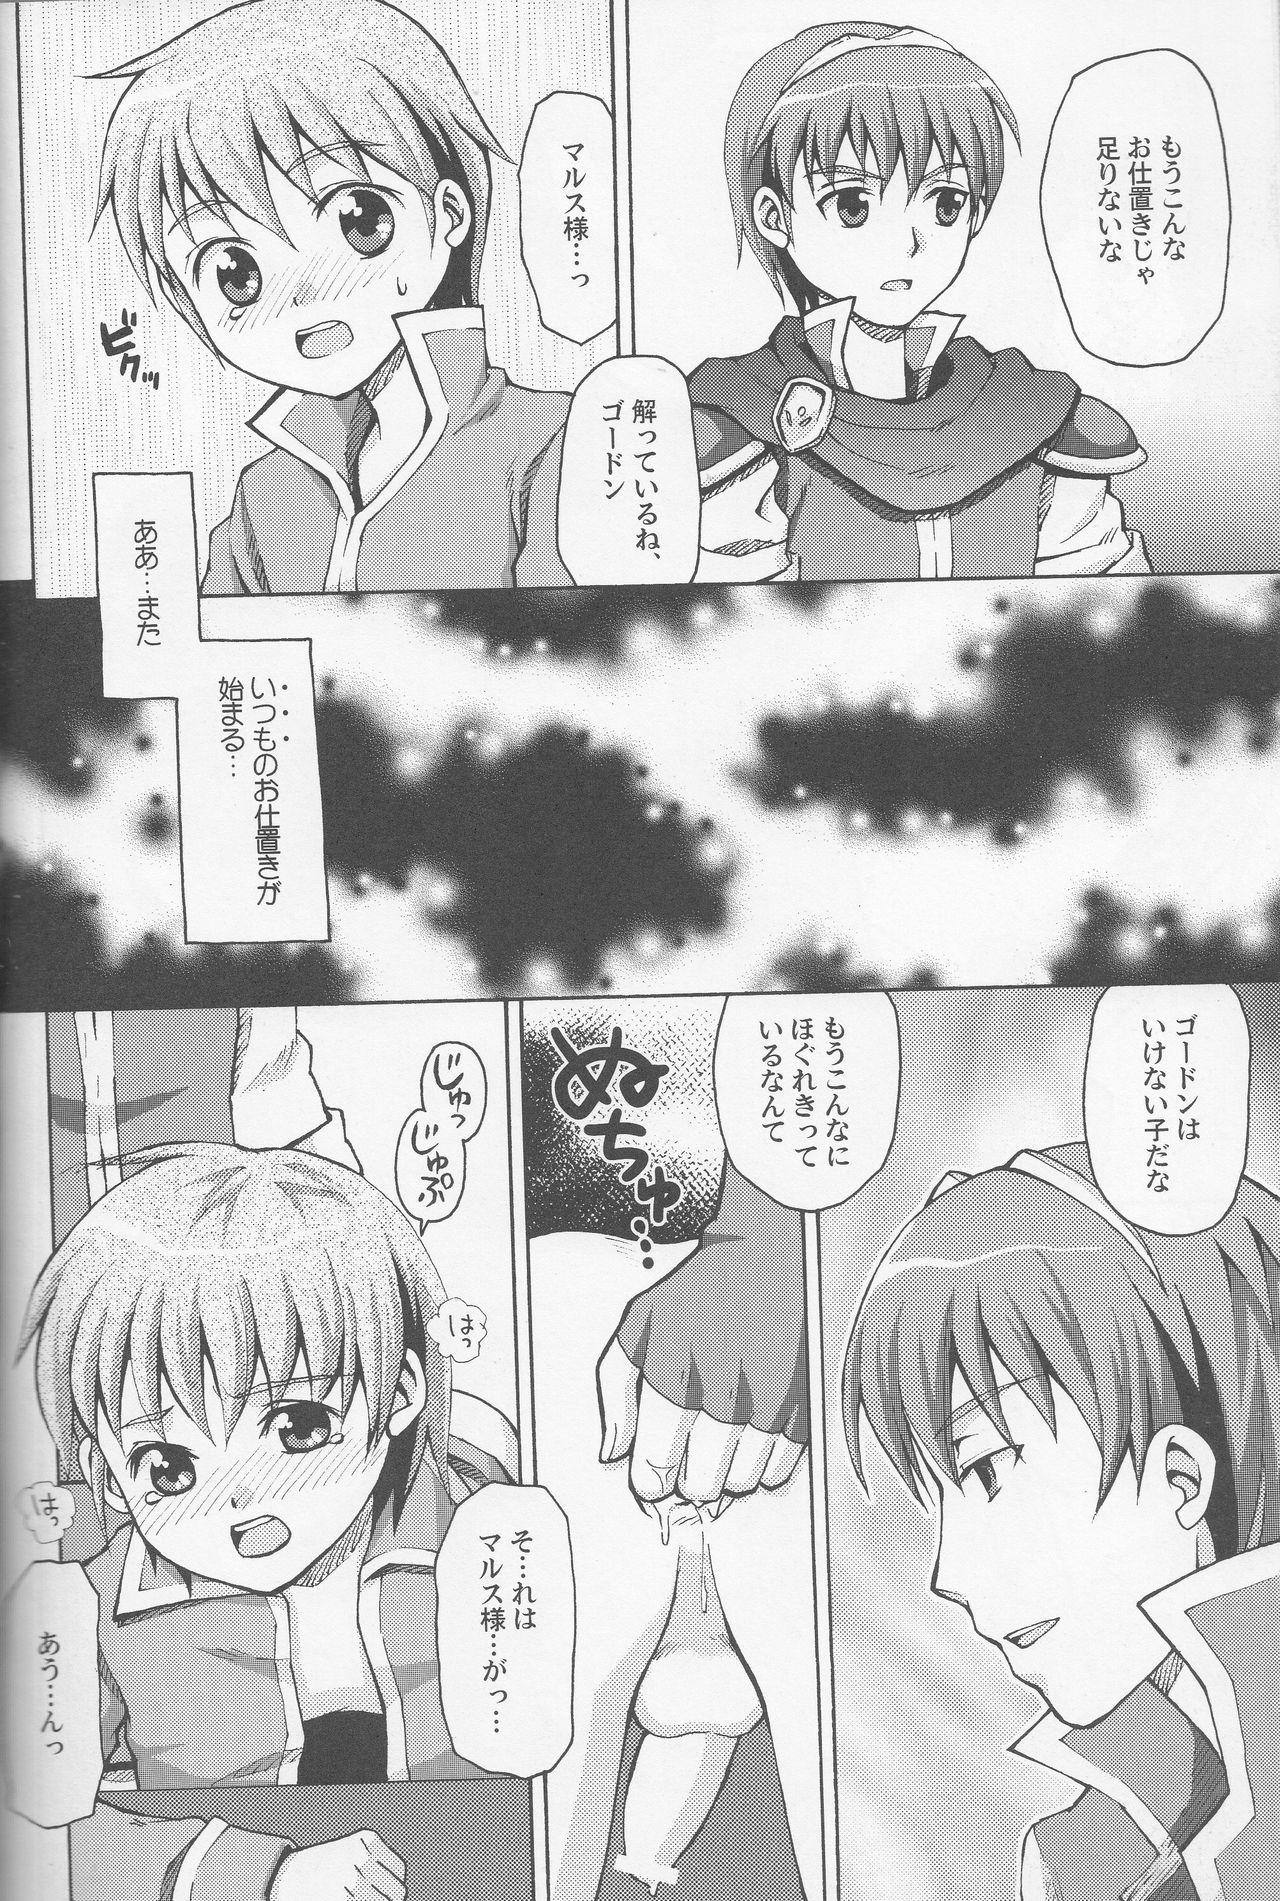 Police お許しください、マルス様 - Fire emblem mystery of the emblem | fire emblem monshou no nazo Chacal - Page 7